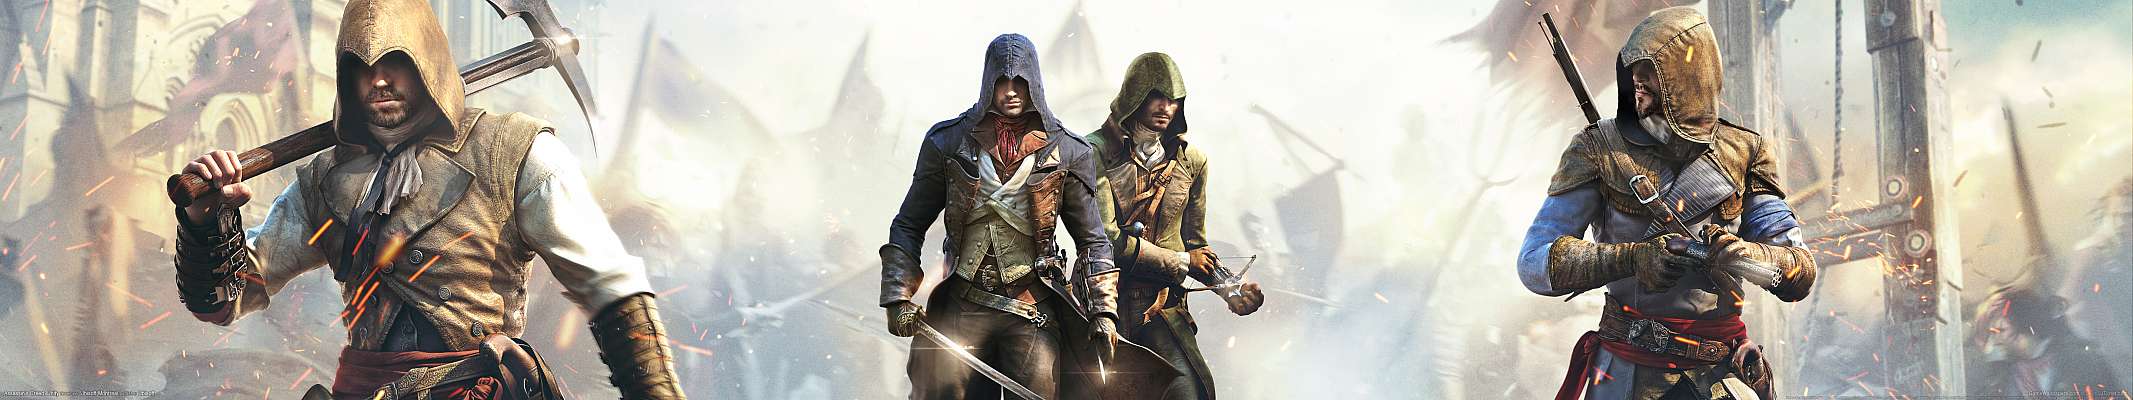 Assassin's Creed: Unity triple screen wallpaper or background